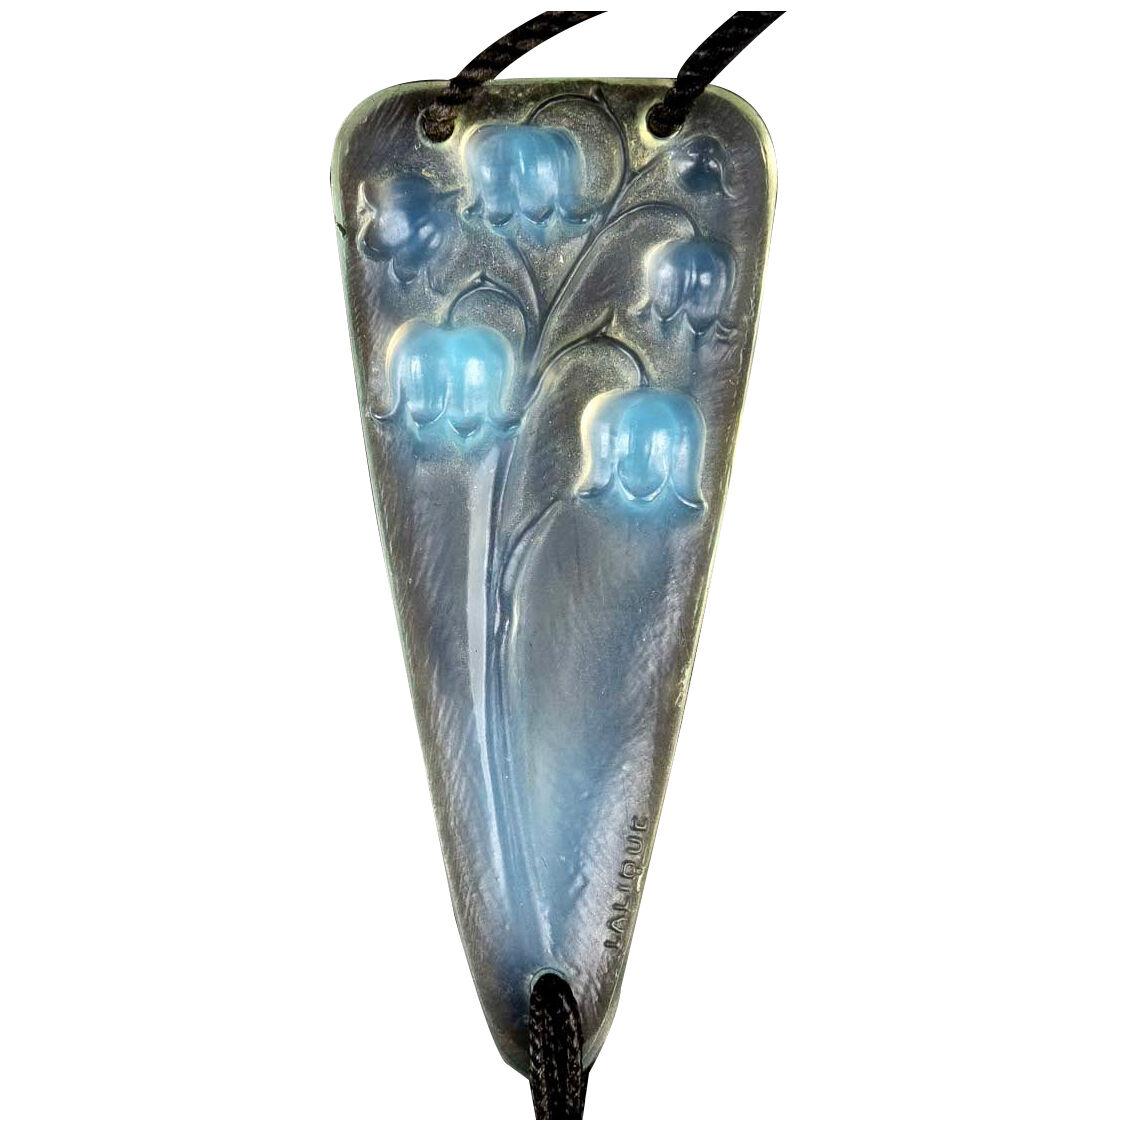  1921 René Lalique - Pendant Muguet Opalescent Glass - Lily Of The Valley